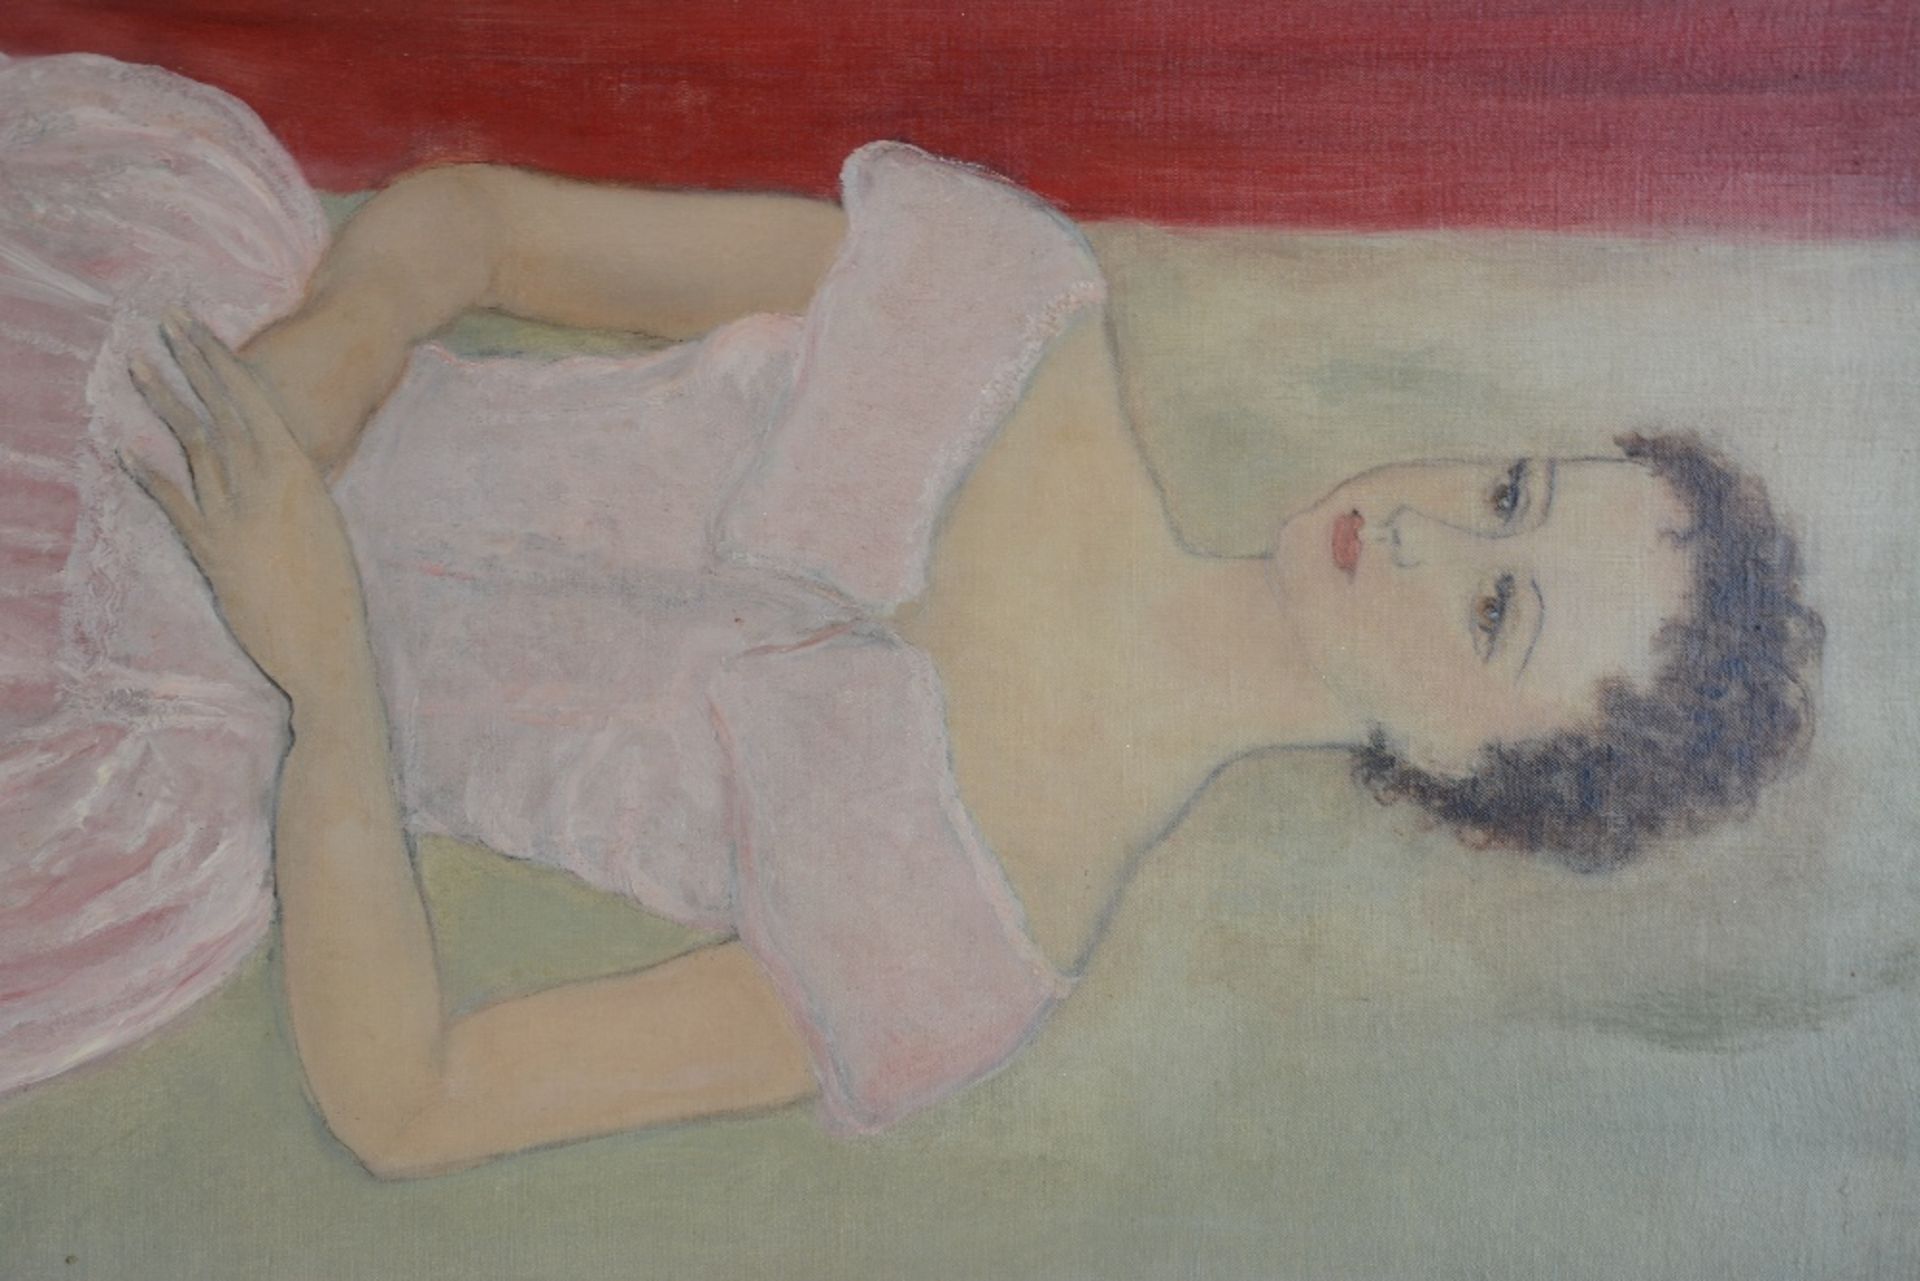 Frey A., portrait of a lady, oil on canvas, 70 x 120 cm - Image 5 of 6